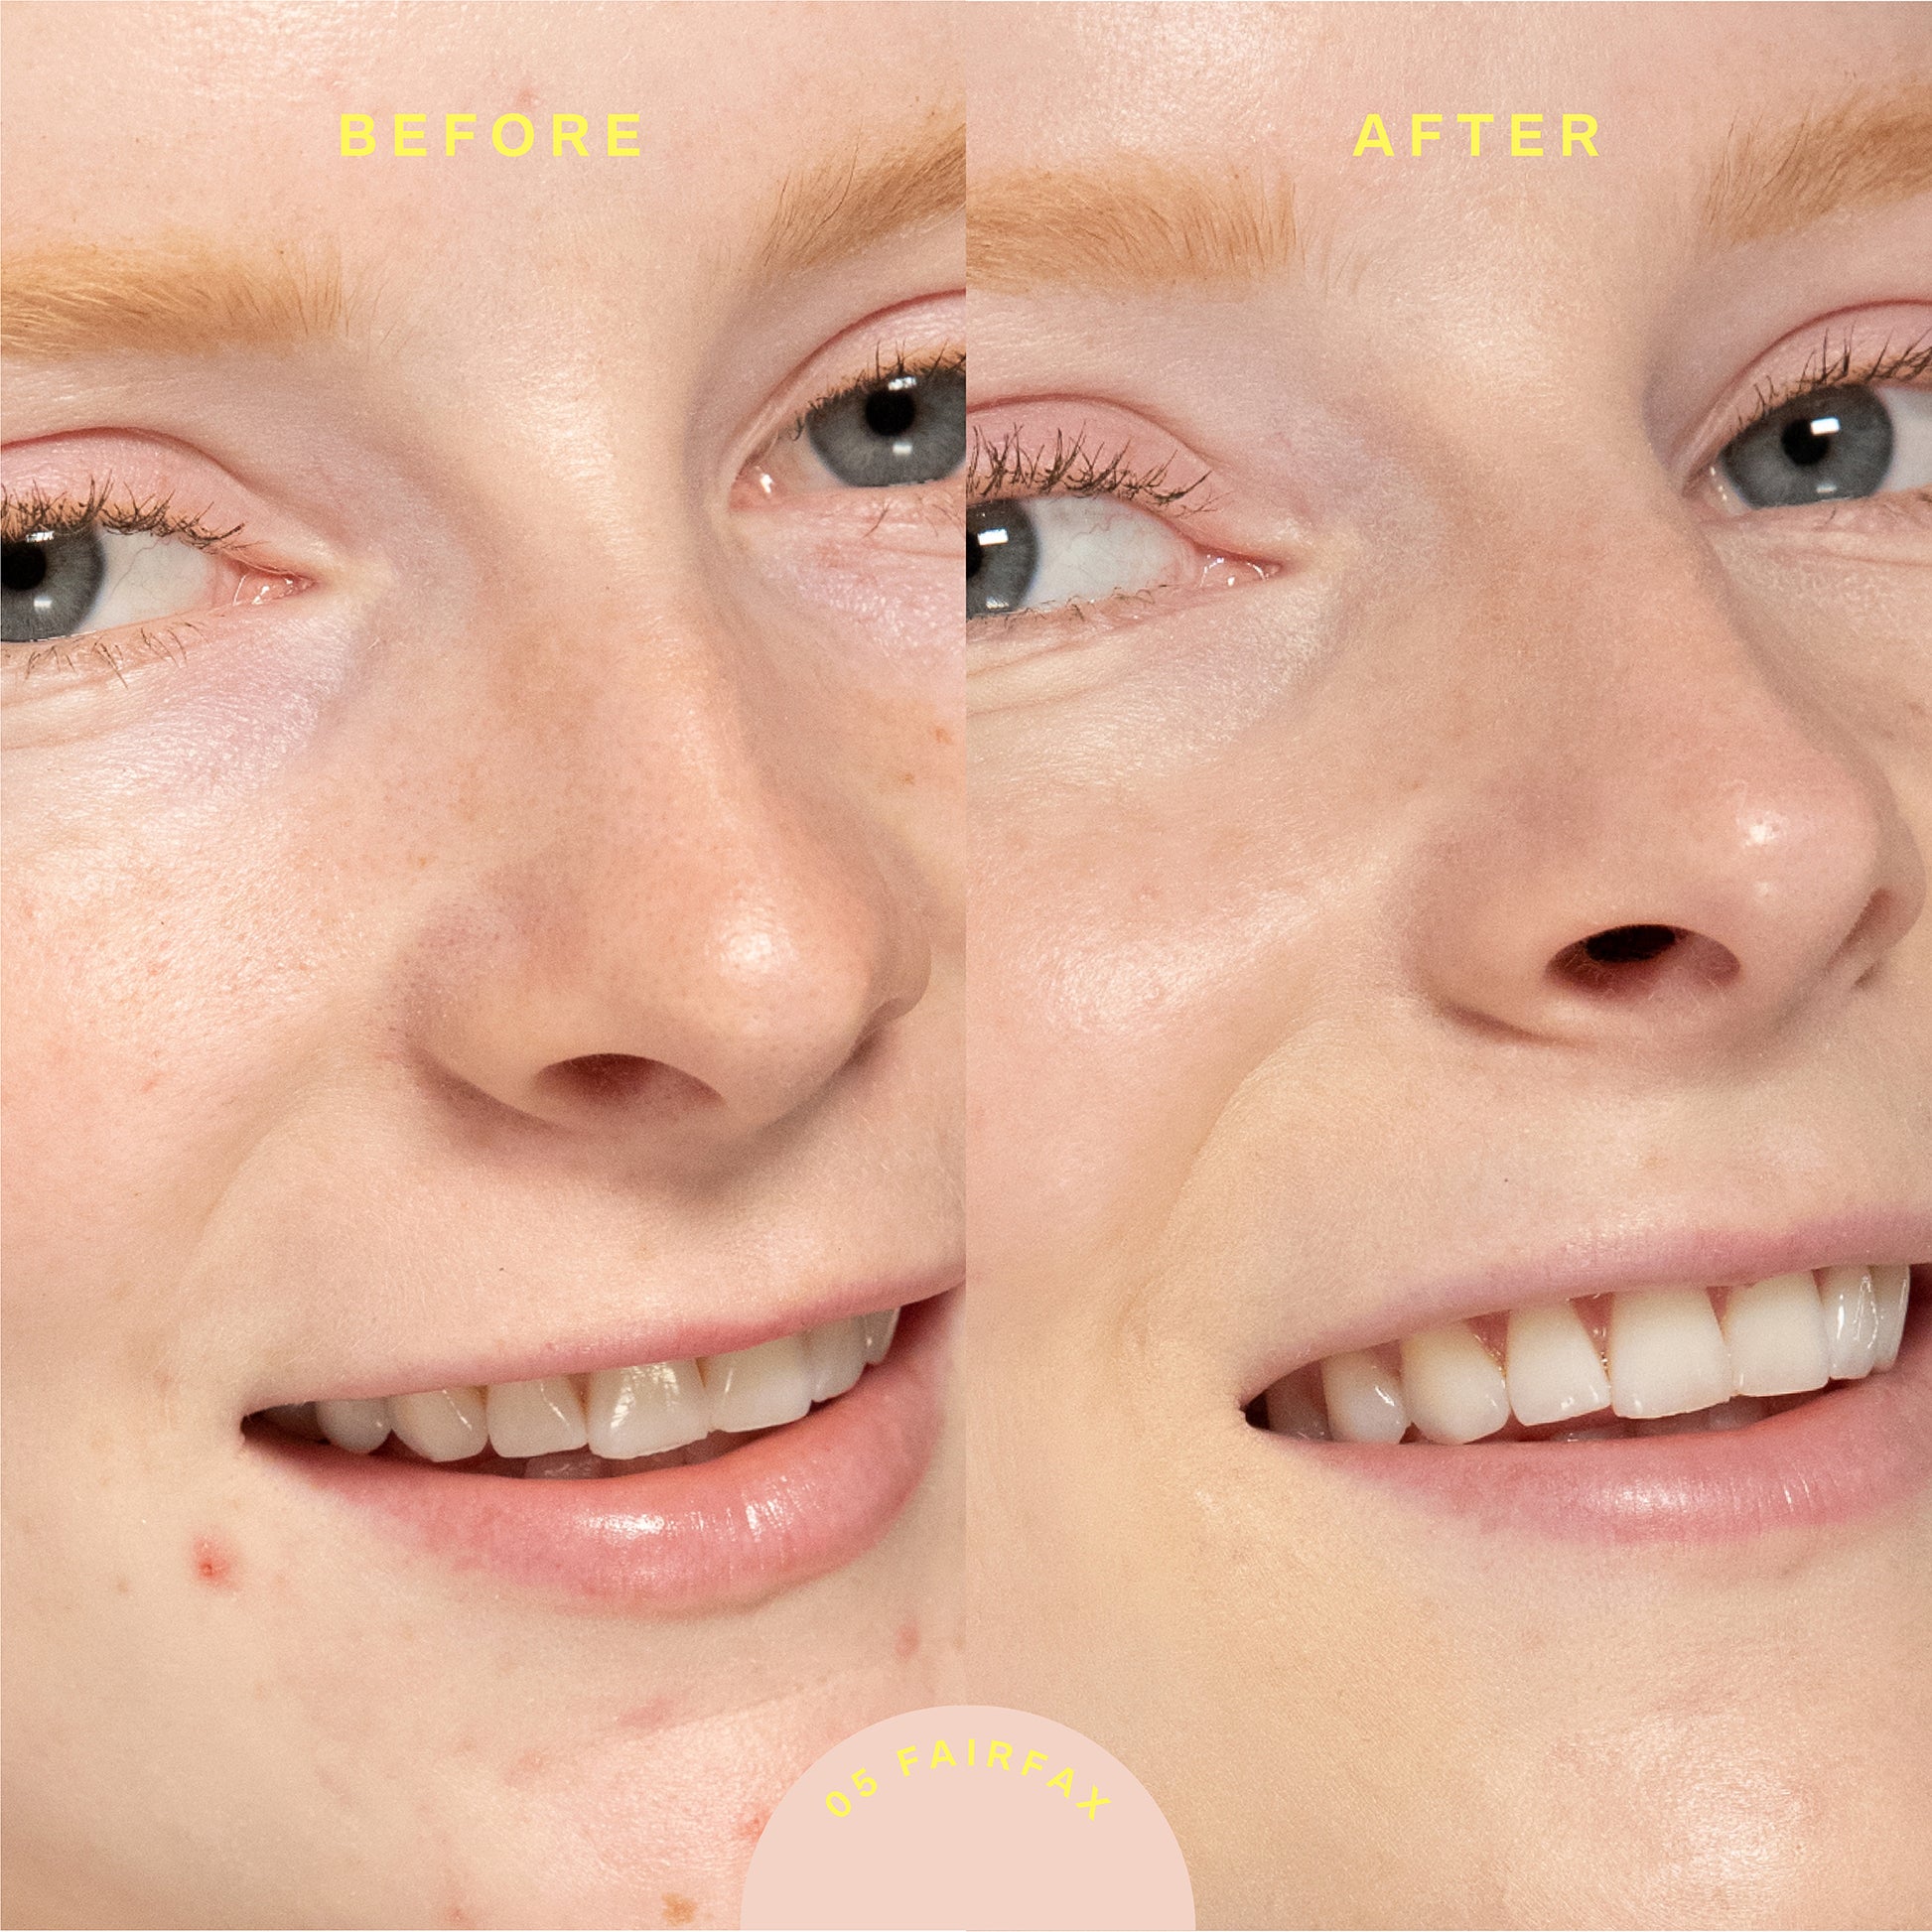 A model before (left image) and after (right image) applyingTower 28 Beauty SunnyDays™ Tinted SPF 30 in the shade 05 Fairfax